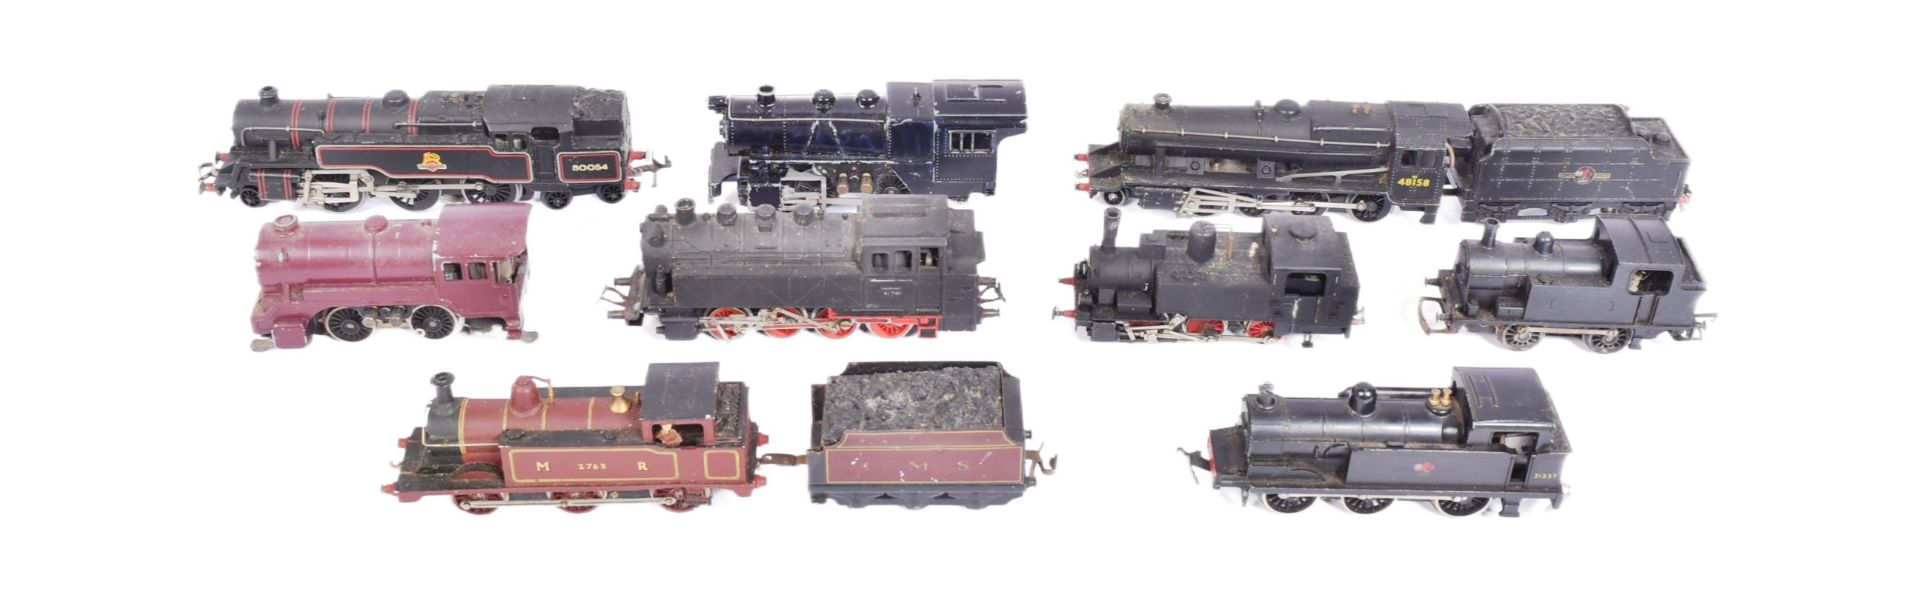 COLLECTION OF ASSORTED HORNBY AND OTHER MAKERS OO GAUGE MODEL RAILWAY LOCOMOTIVE ENGINES